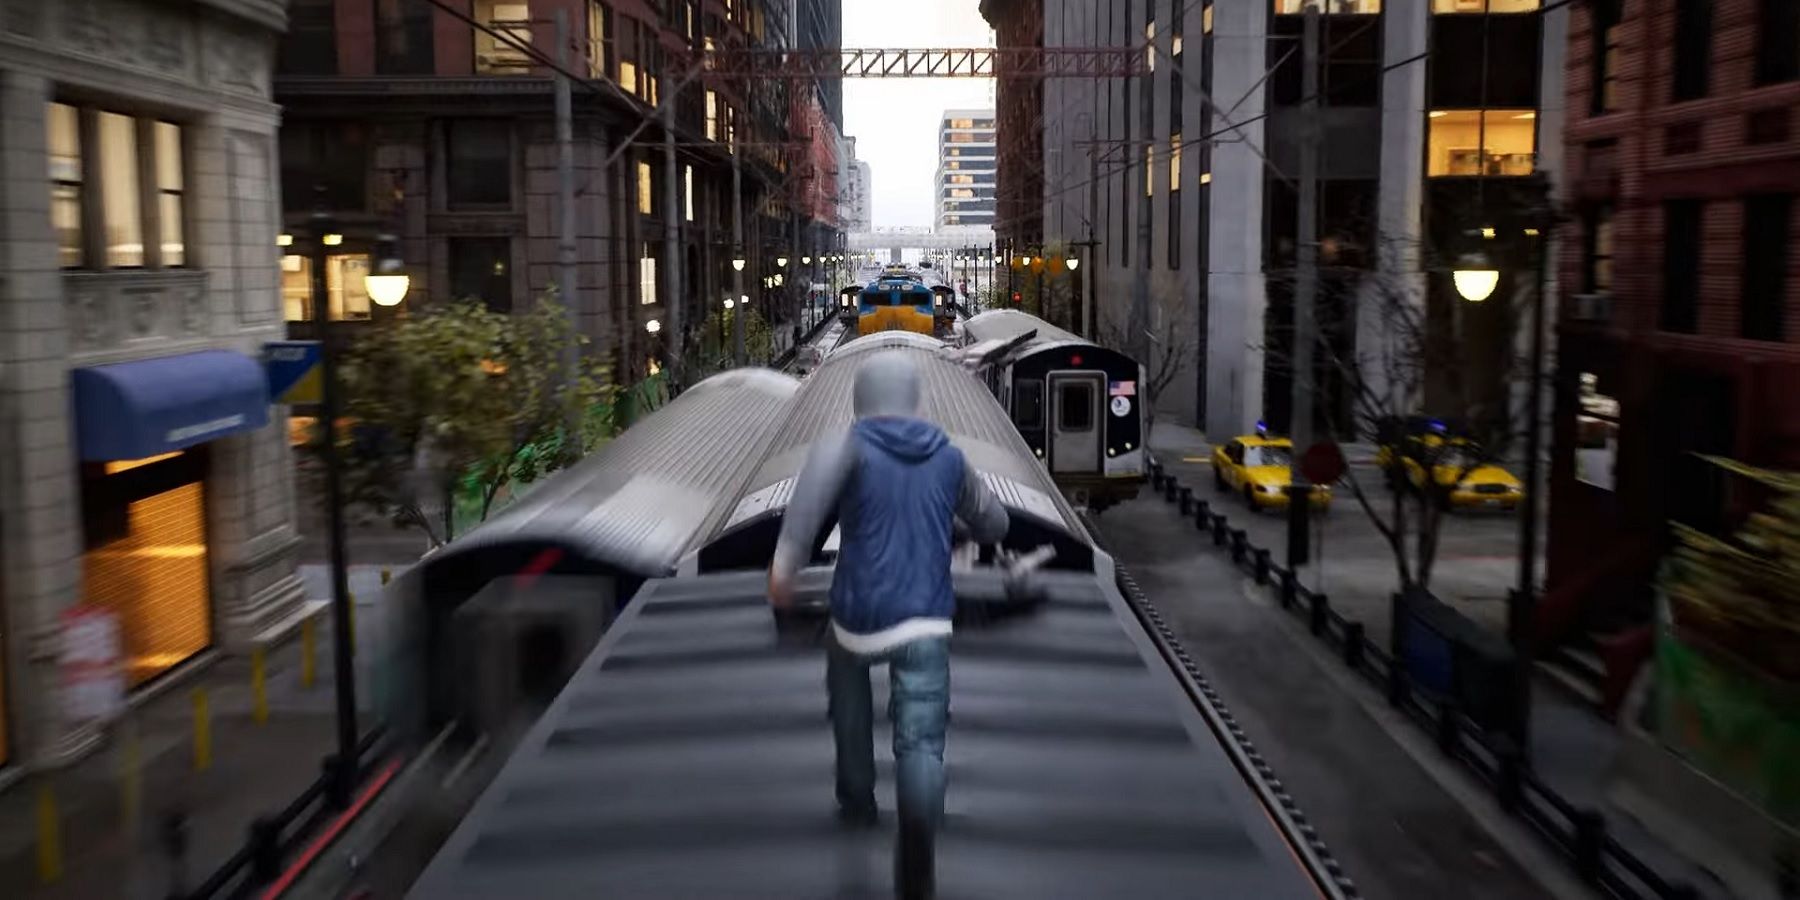 r recreates Subway Surfers using Unreal Engine, leaves viewers in  shock over final result